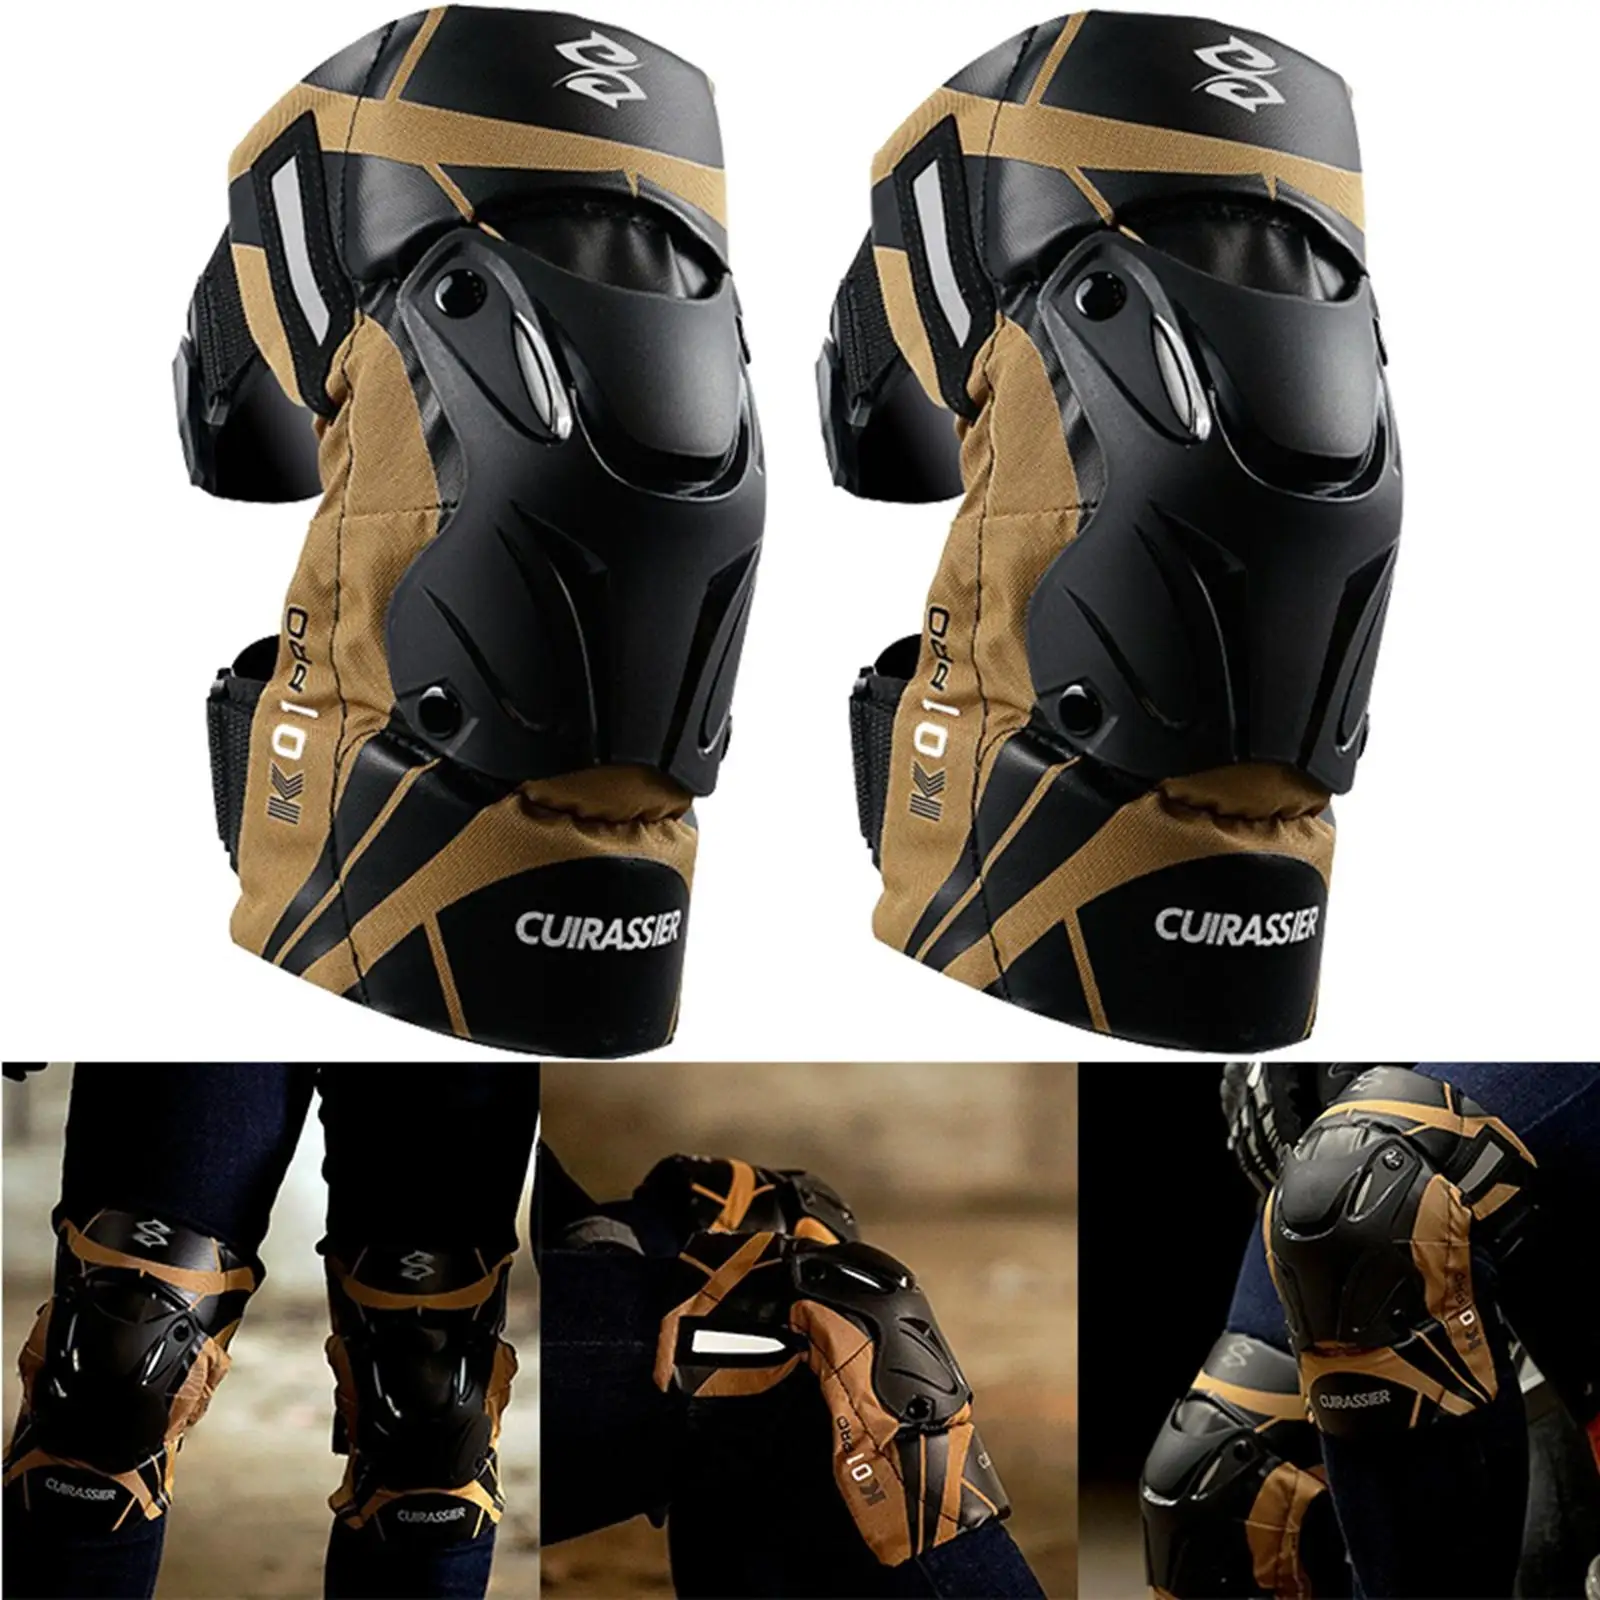 2x Motorcycle Knee Pads Adjustable Guard Fit for Motocross Racing Unisex